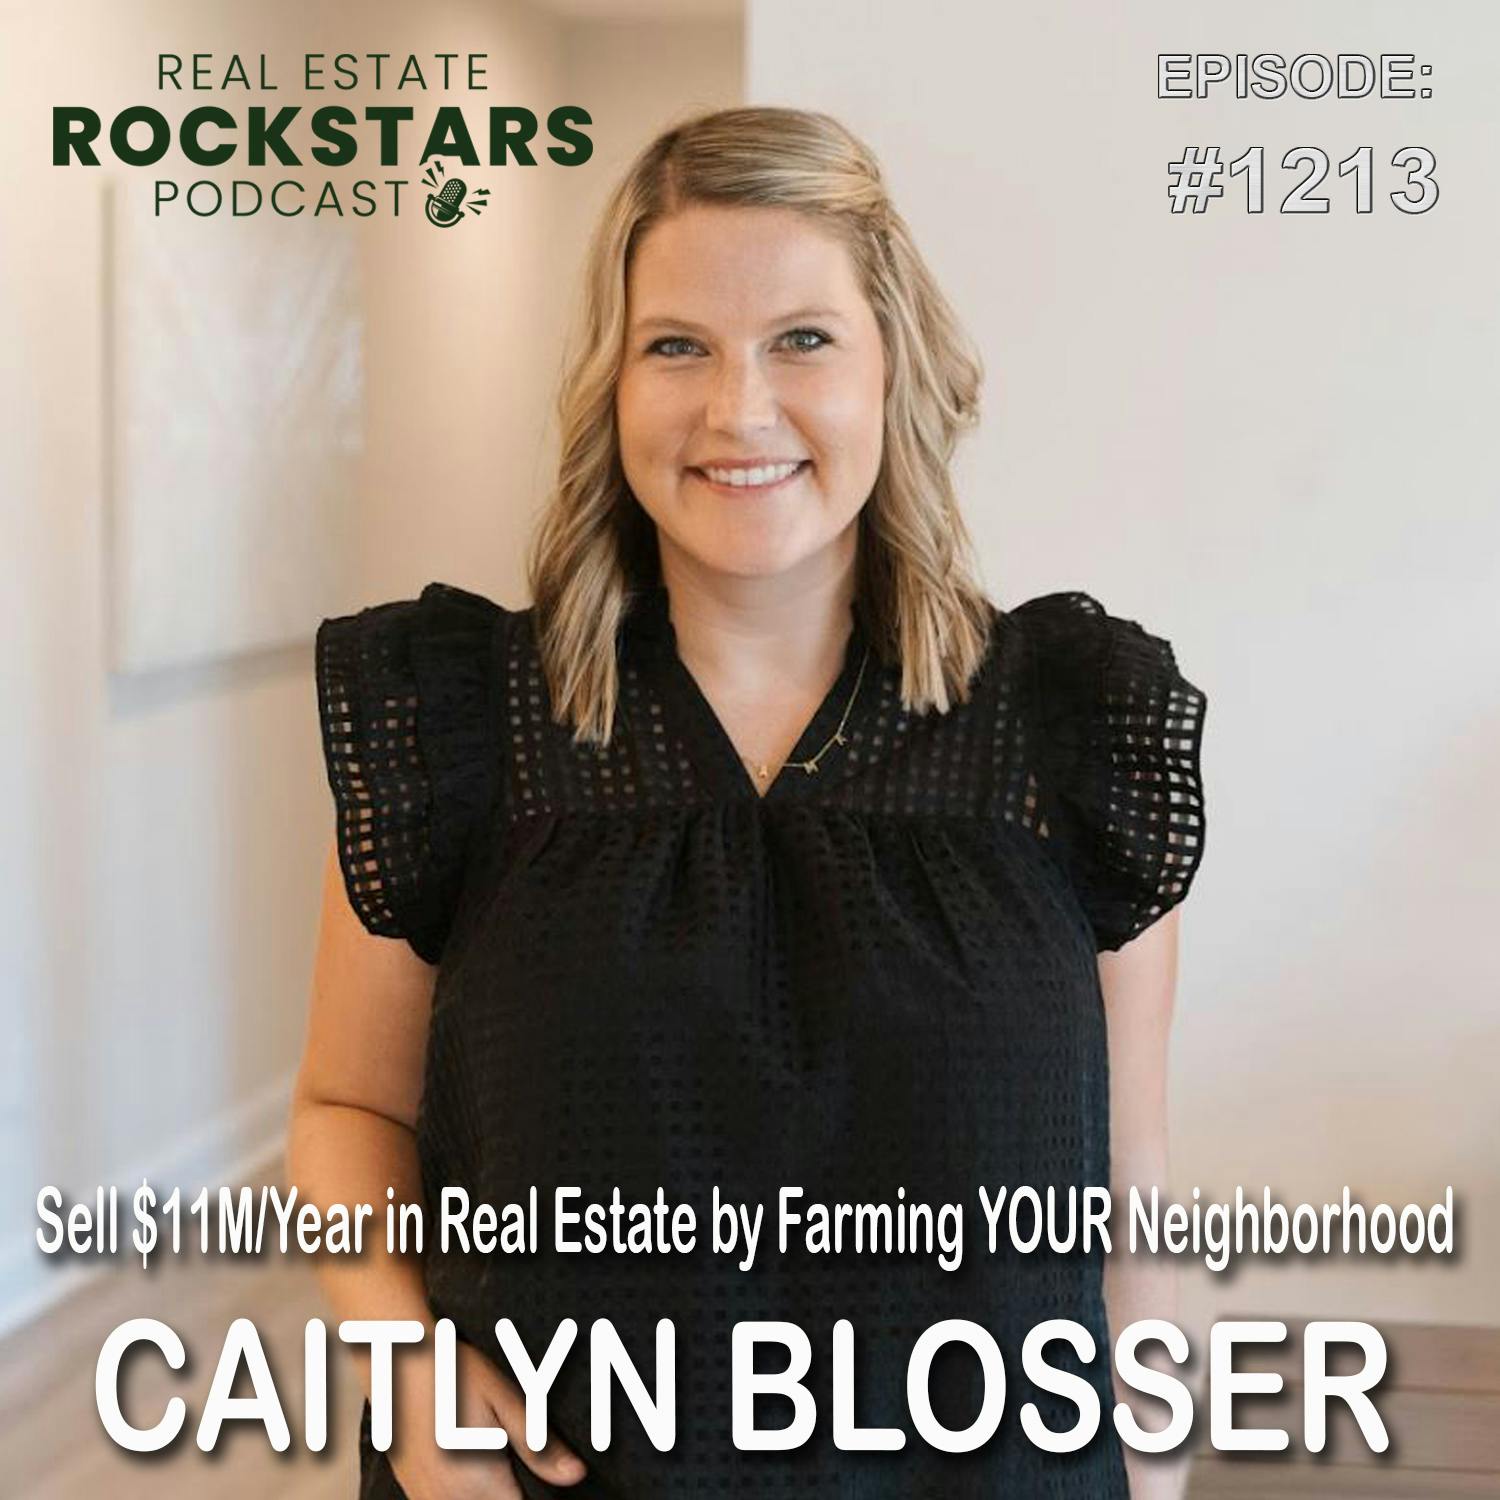 1213: Sell $11M/Year in Real Estate by Farming YOUR Neighborhood - Caitlyn Blosser